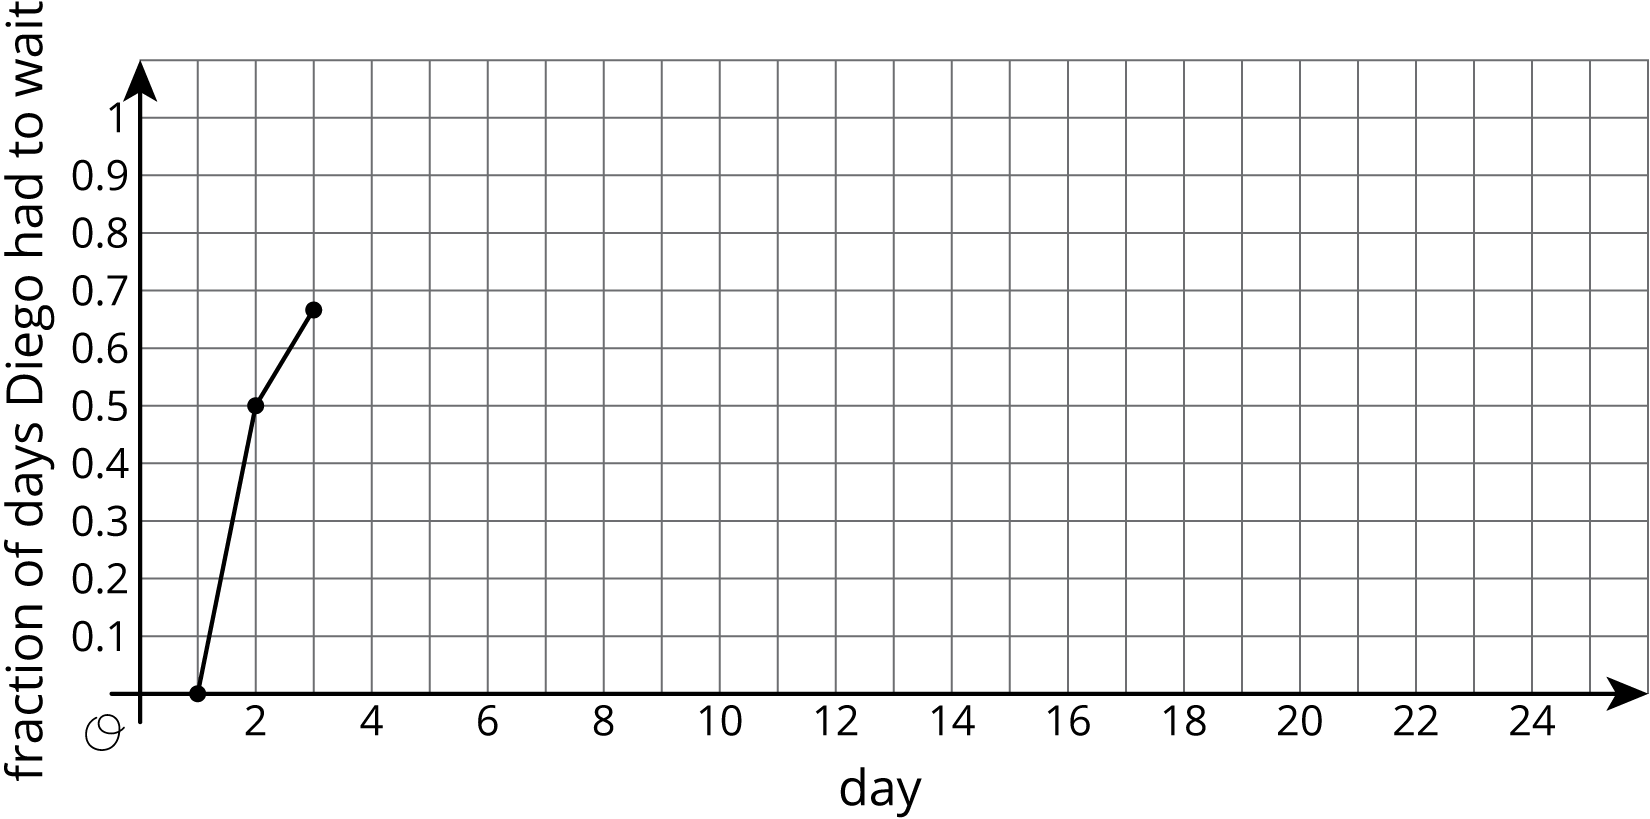 A graph of two connected line segments on a coordinate grid with the origin marked “O.” The horizontal axis is labeled “day”, with the numbers 0 through 24, in increments of 2, indicated. There are vertical grid lines midway between. The vertical axis is labeled “fraction of days Diego had to wait” with the numbers 0 point 1 through 1, in increments of 0 point 1, indicated.  The first line segment begins at the point with coordinates 1 comma 0 and moves upward and to the right, ending at the point with coordinates 2 comma 0 point 5. The second line segment begins where the first line ends, and moves slightly upward and to the right, ending at the point with coordinates 3 comma 0 point 6 7.